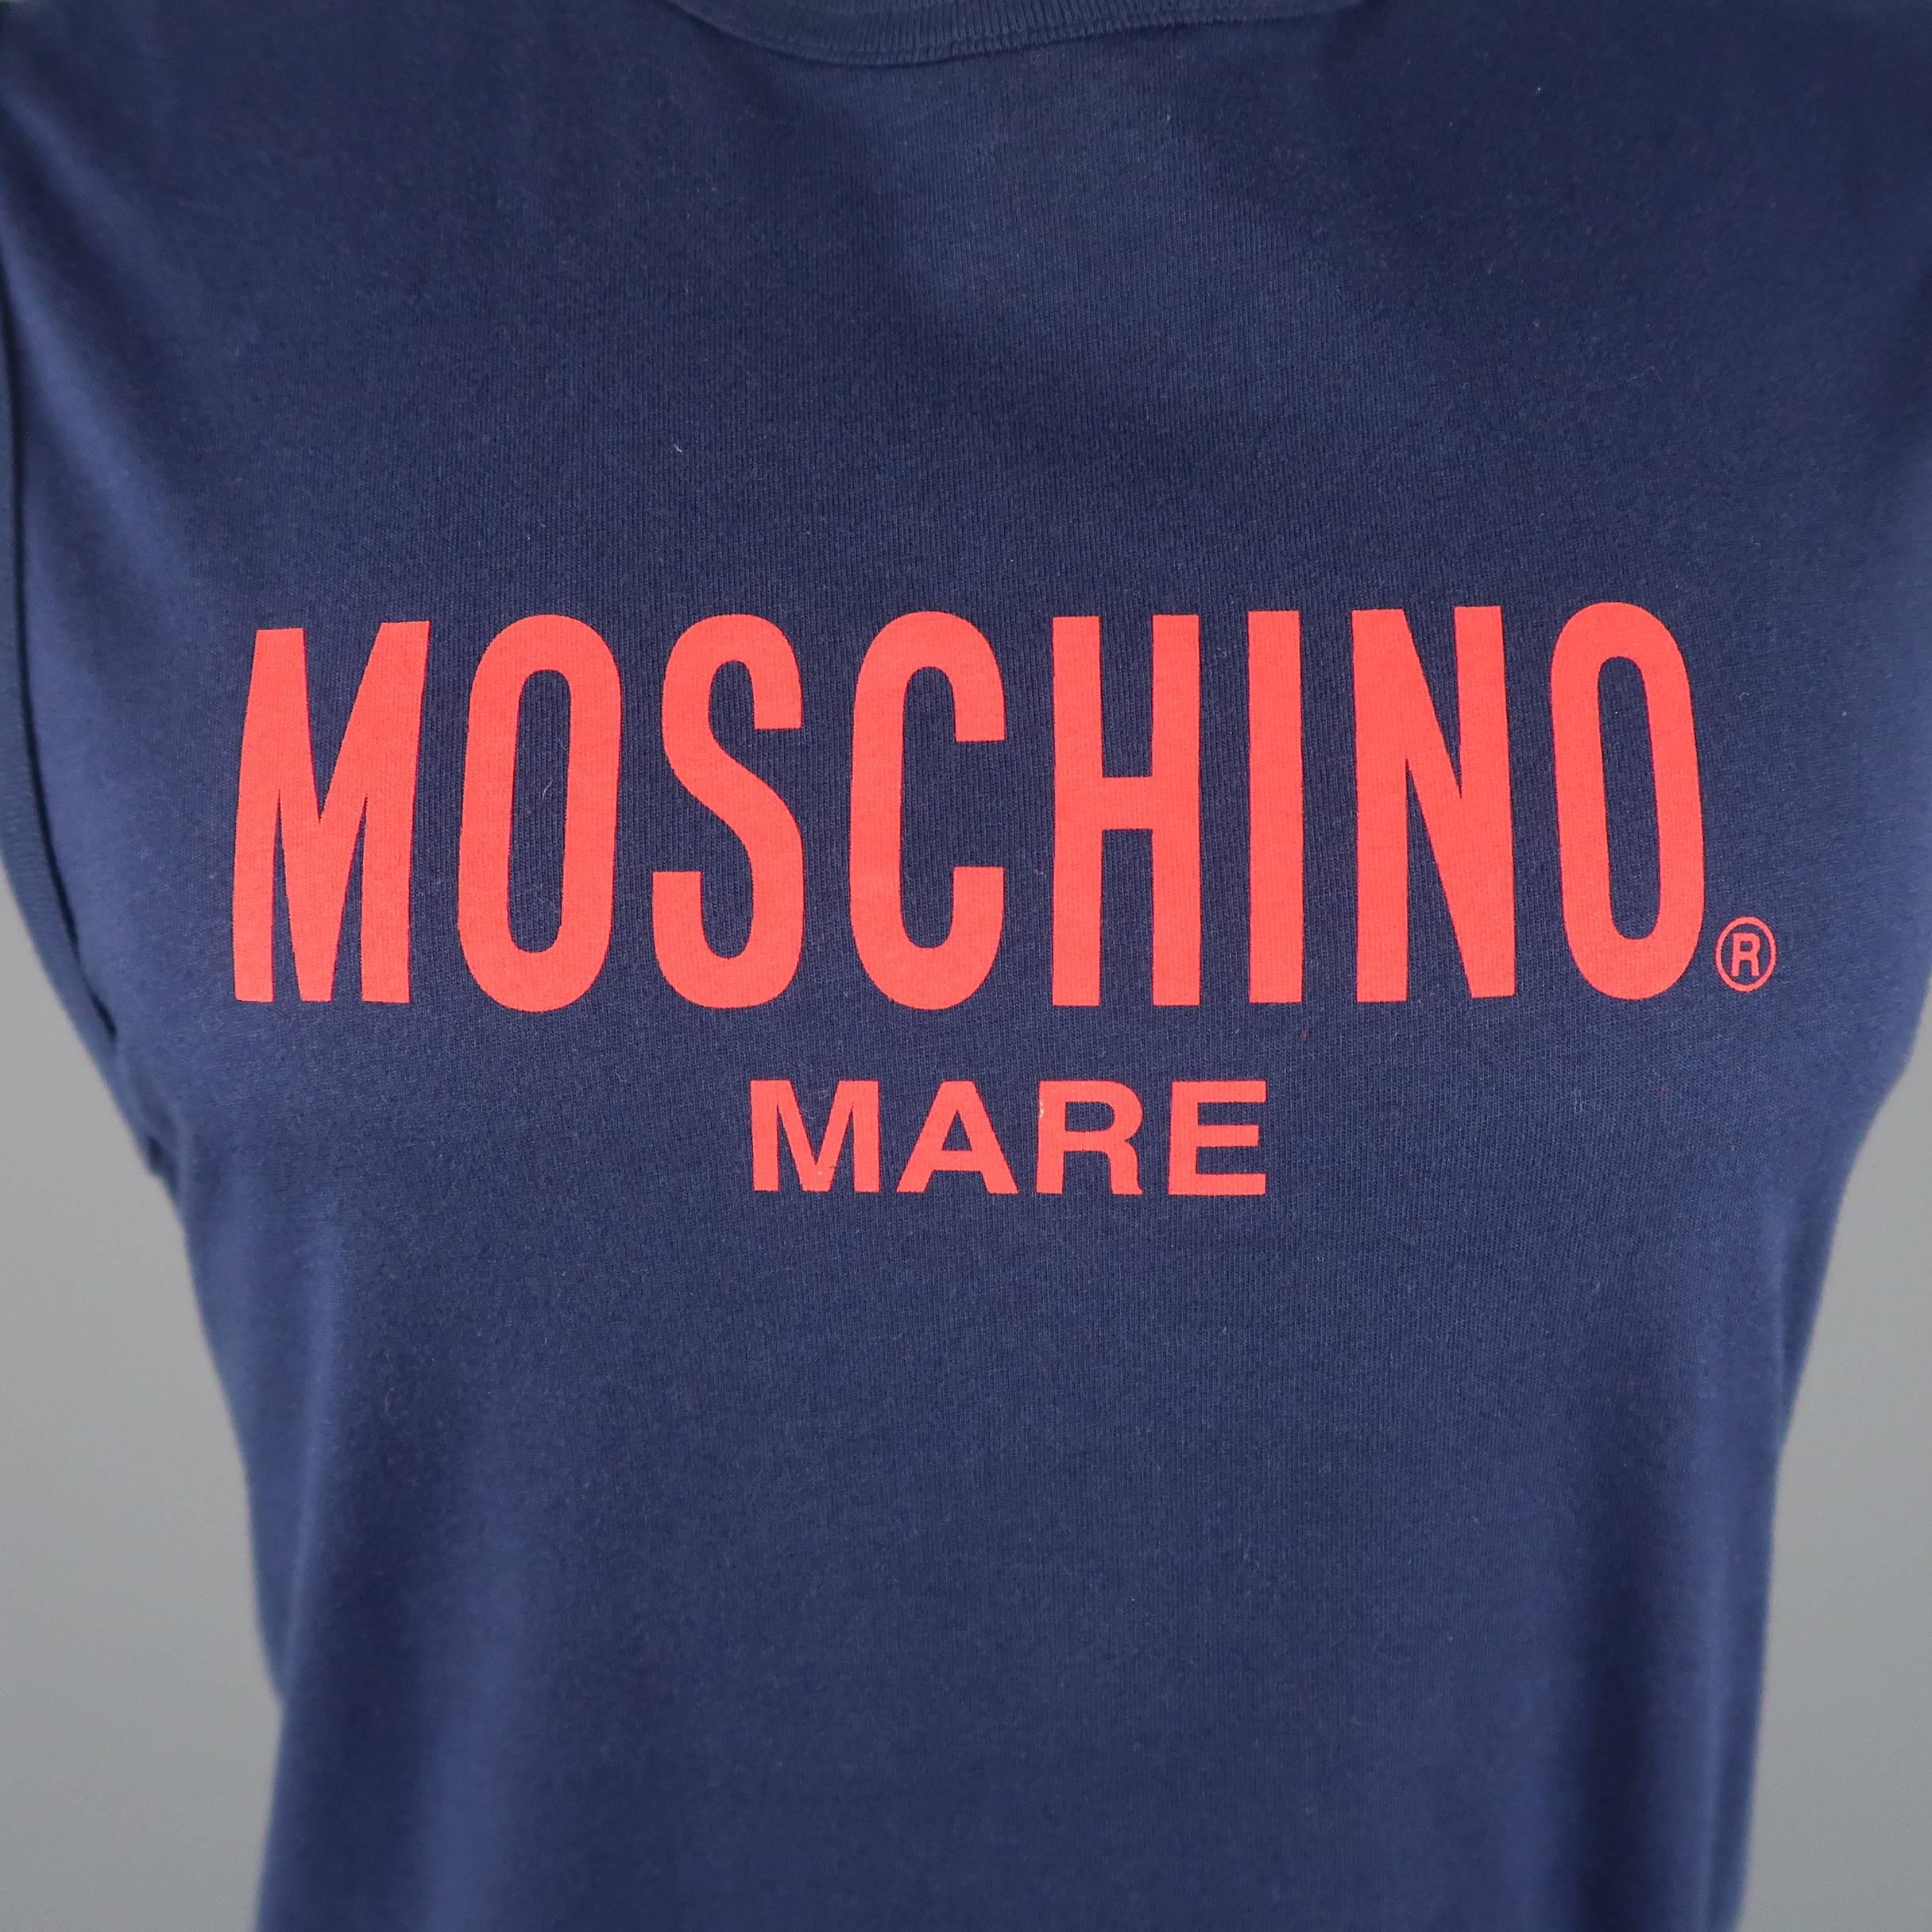 MOSCHINO MARE tank top comes in navy blue cotton jersey with red Logo on front.
 
New with Tags
Marked: M
 
Measurements:
 
Shoulder: 16.5 in.
Chest: 40 in.
Length: 25 in.
